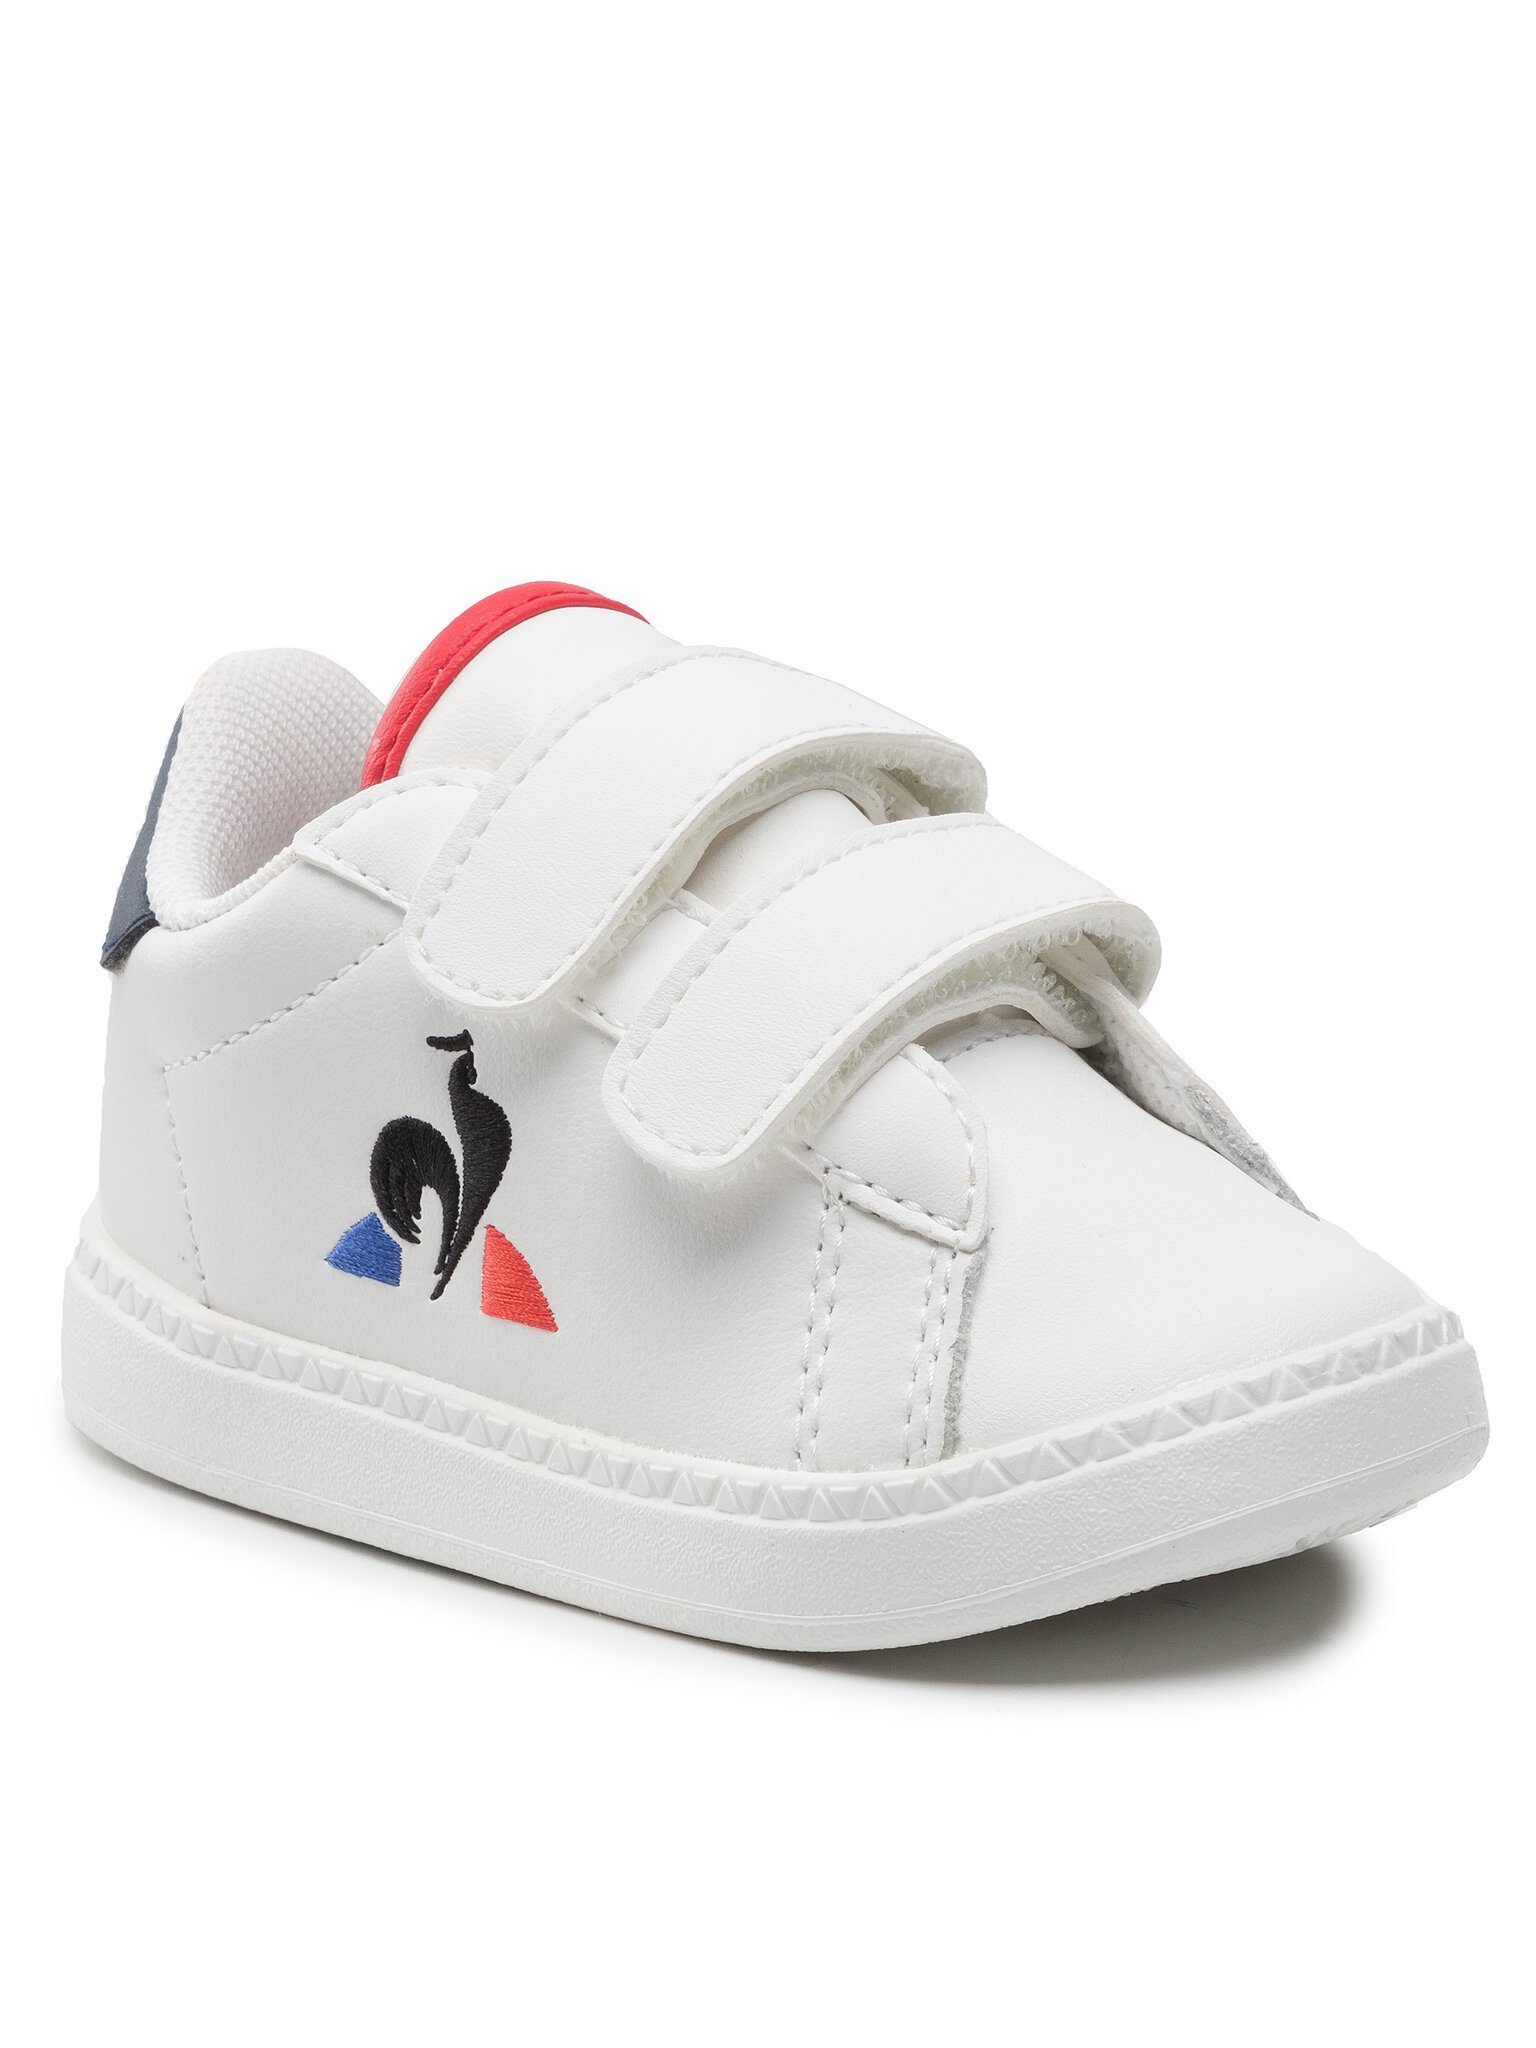 Le Coq Sportif Sneakers Courtset Inf 2210149 Optical White Sneaker